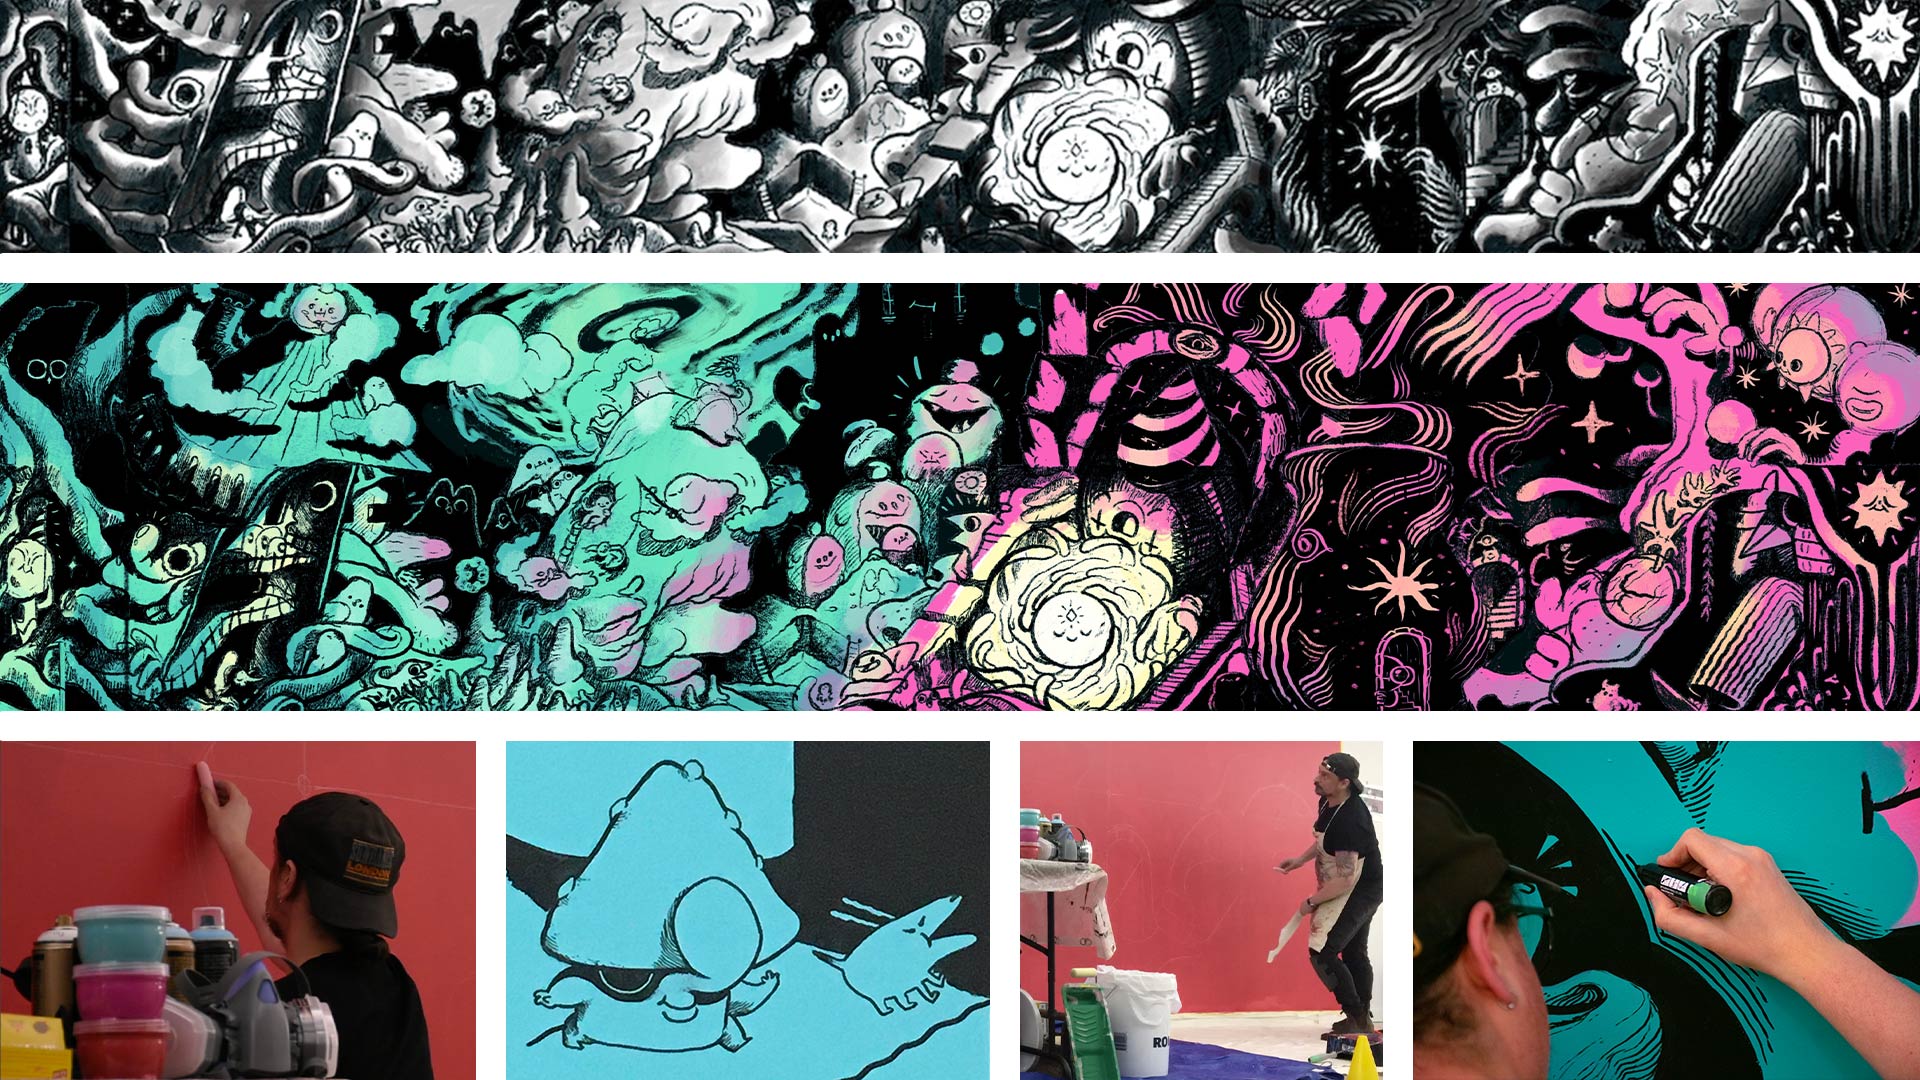 Two draft sketches of the mural composition, depicting a swirling young star emerging from a floral cocoon with dozens of fantastic creatures large and small converging excitedly. Below are four work-in-progress shots of the artist drawing freehand on the wall. A large-nosed mushroom creature waddles with a barking dog, and intricate linework is laid down on a wintry giant’s head.